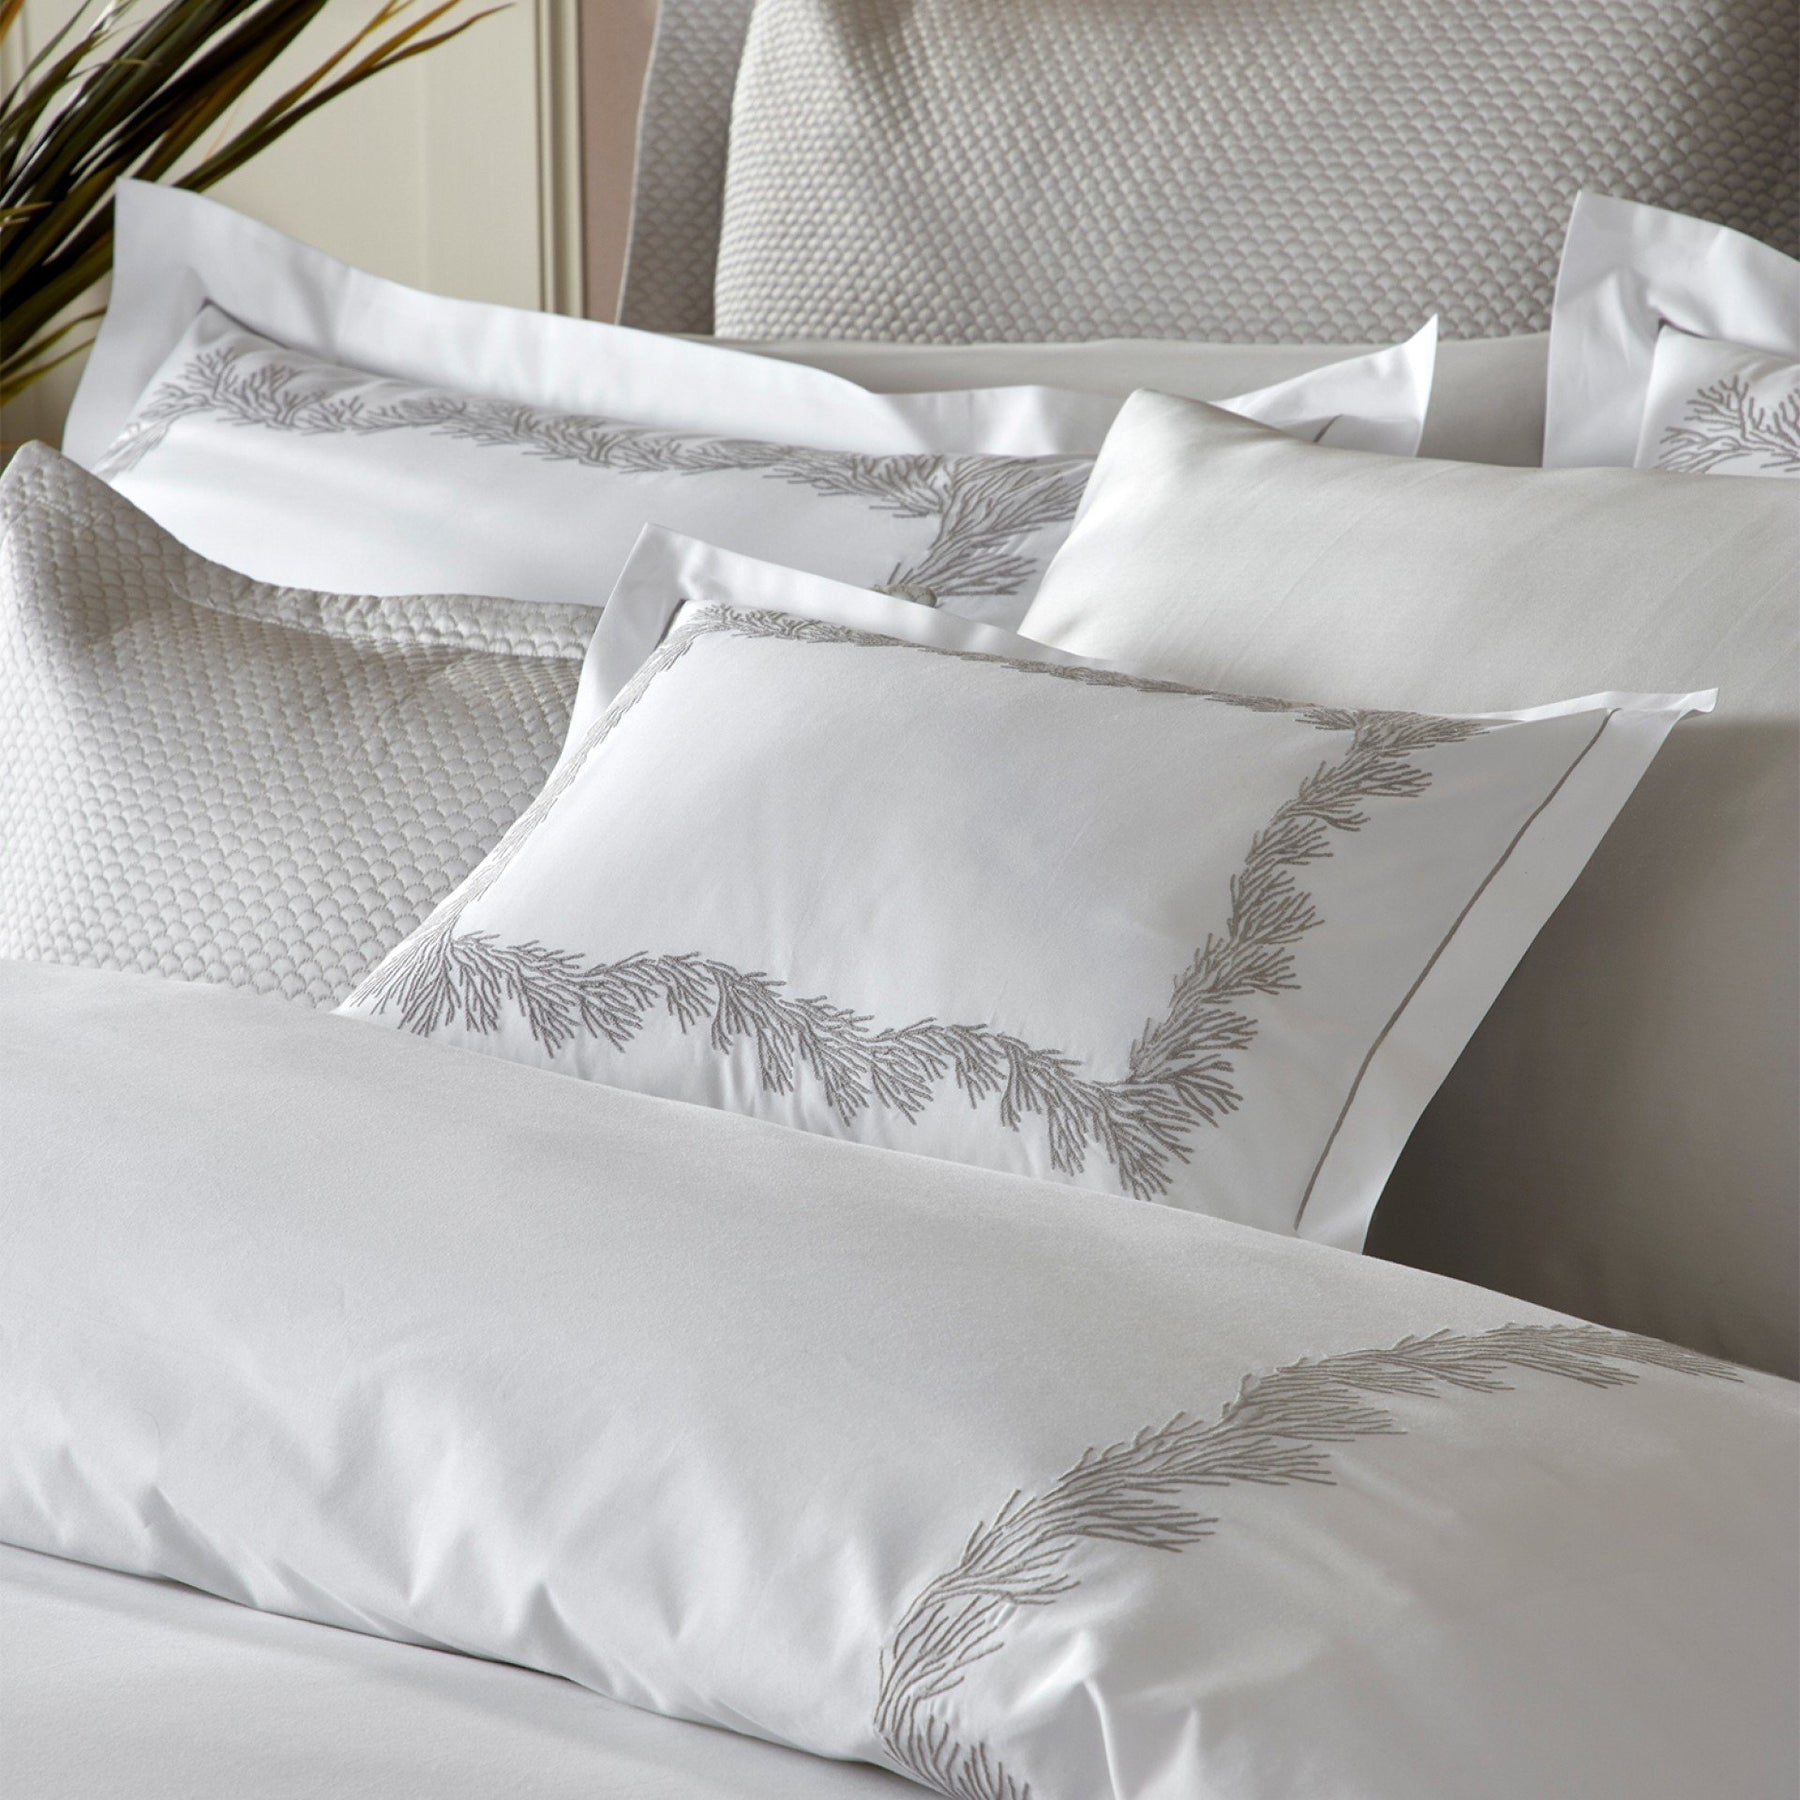 Atoll Bed Linens - Pioneer Linens